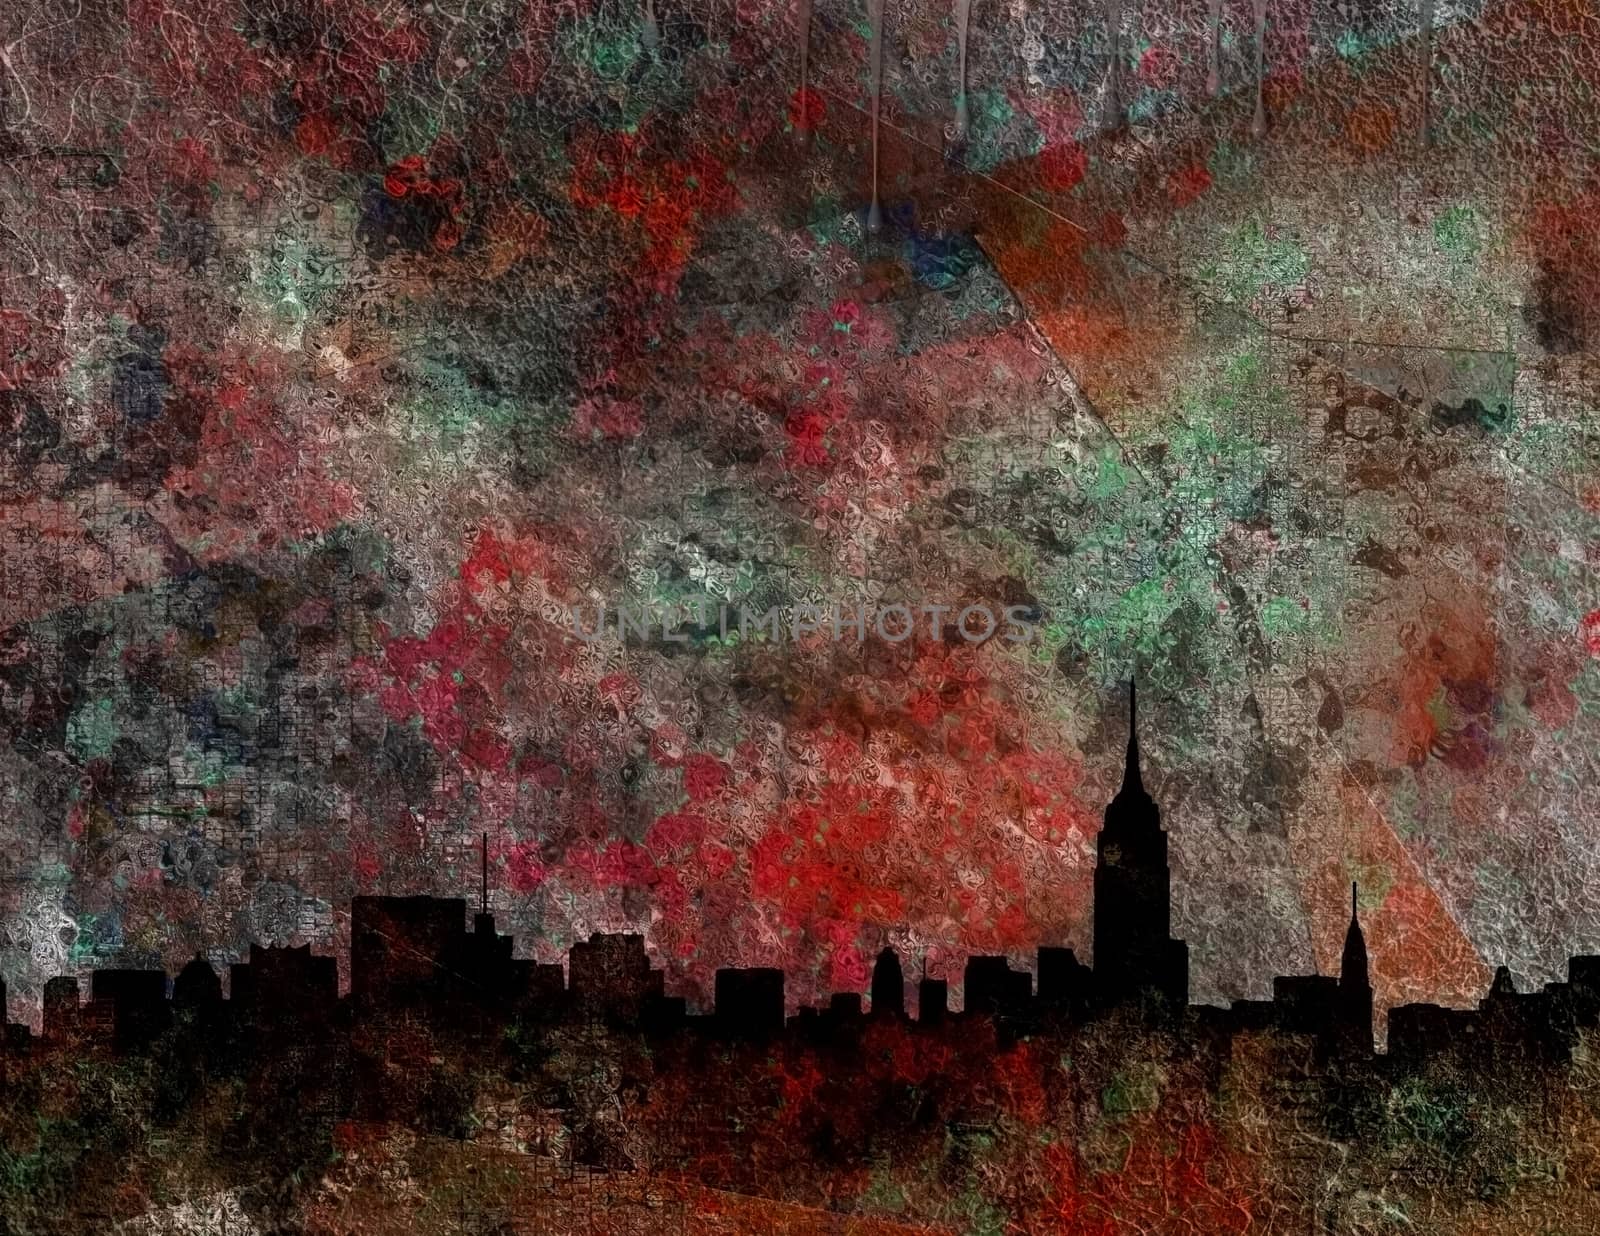 NY Abstract. New York skyline silhouette. Artwork for creative graphic design